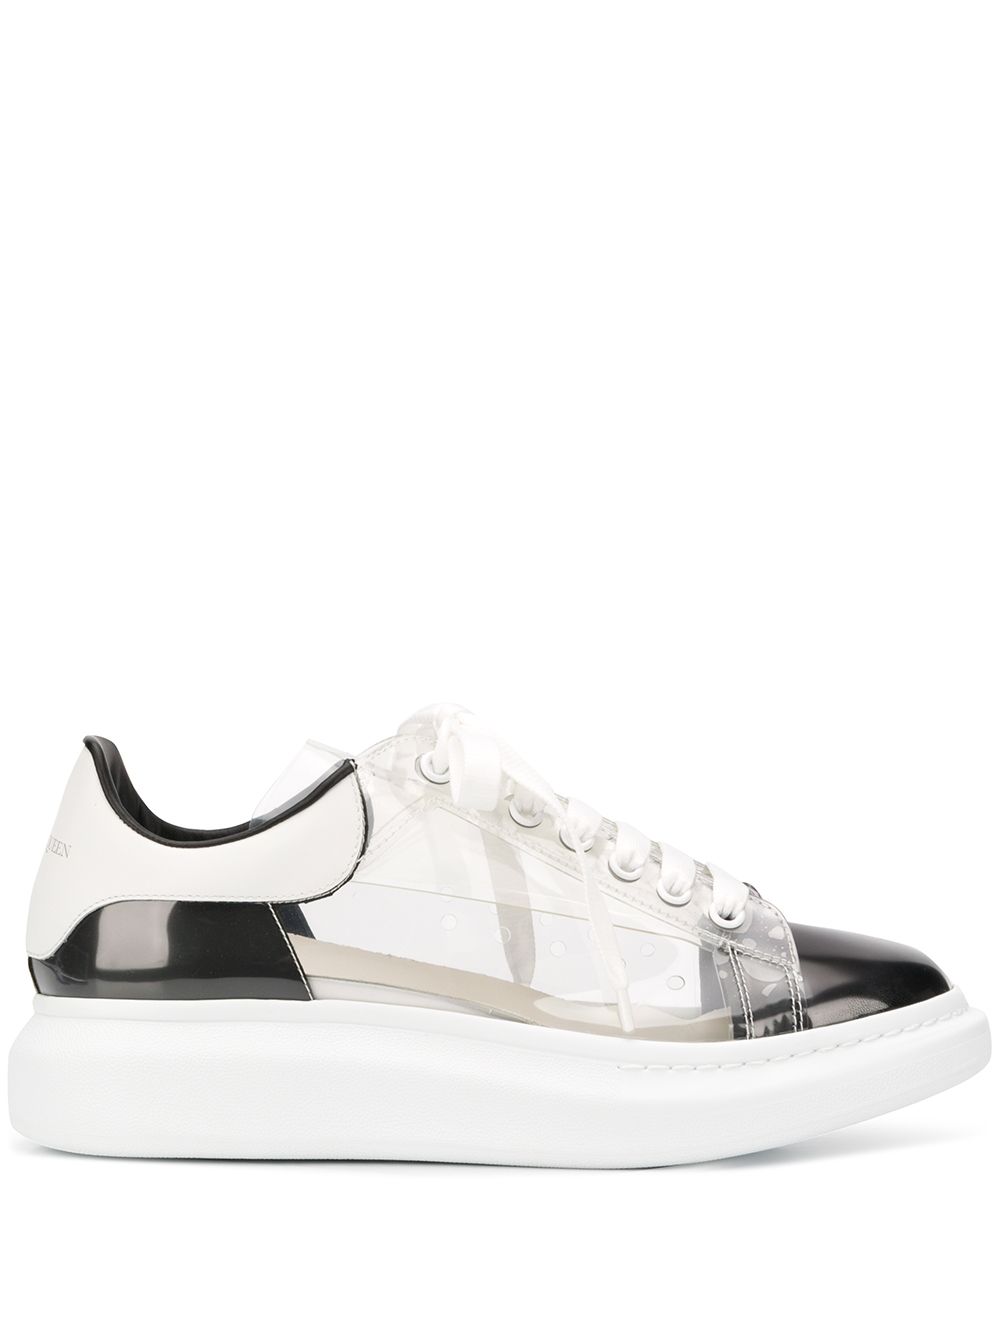 alexander mcqueen shoes afterpay